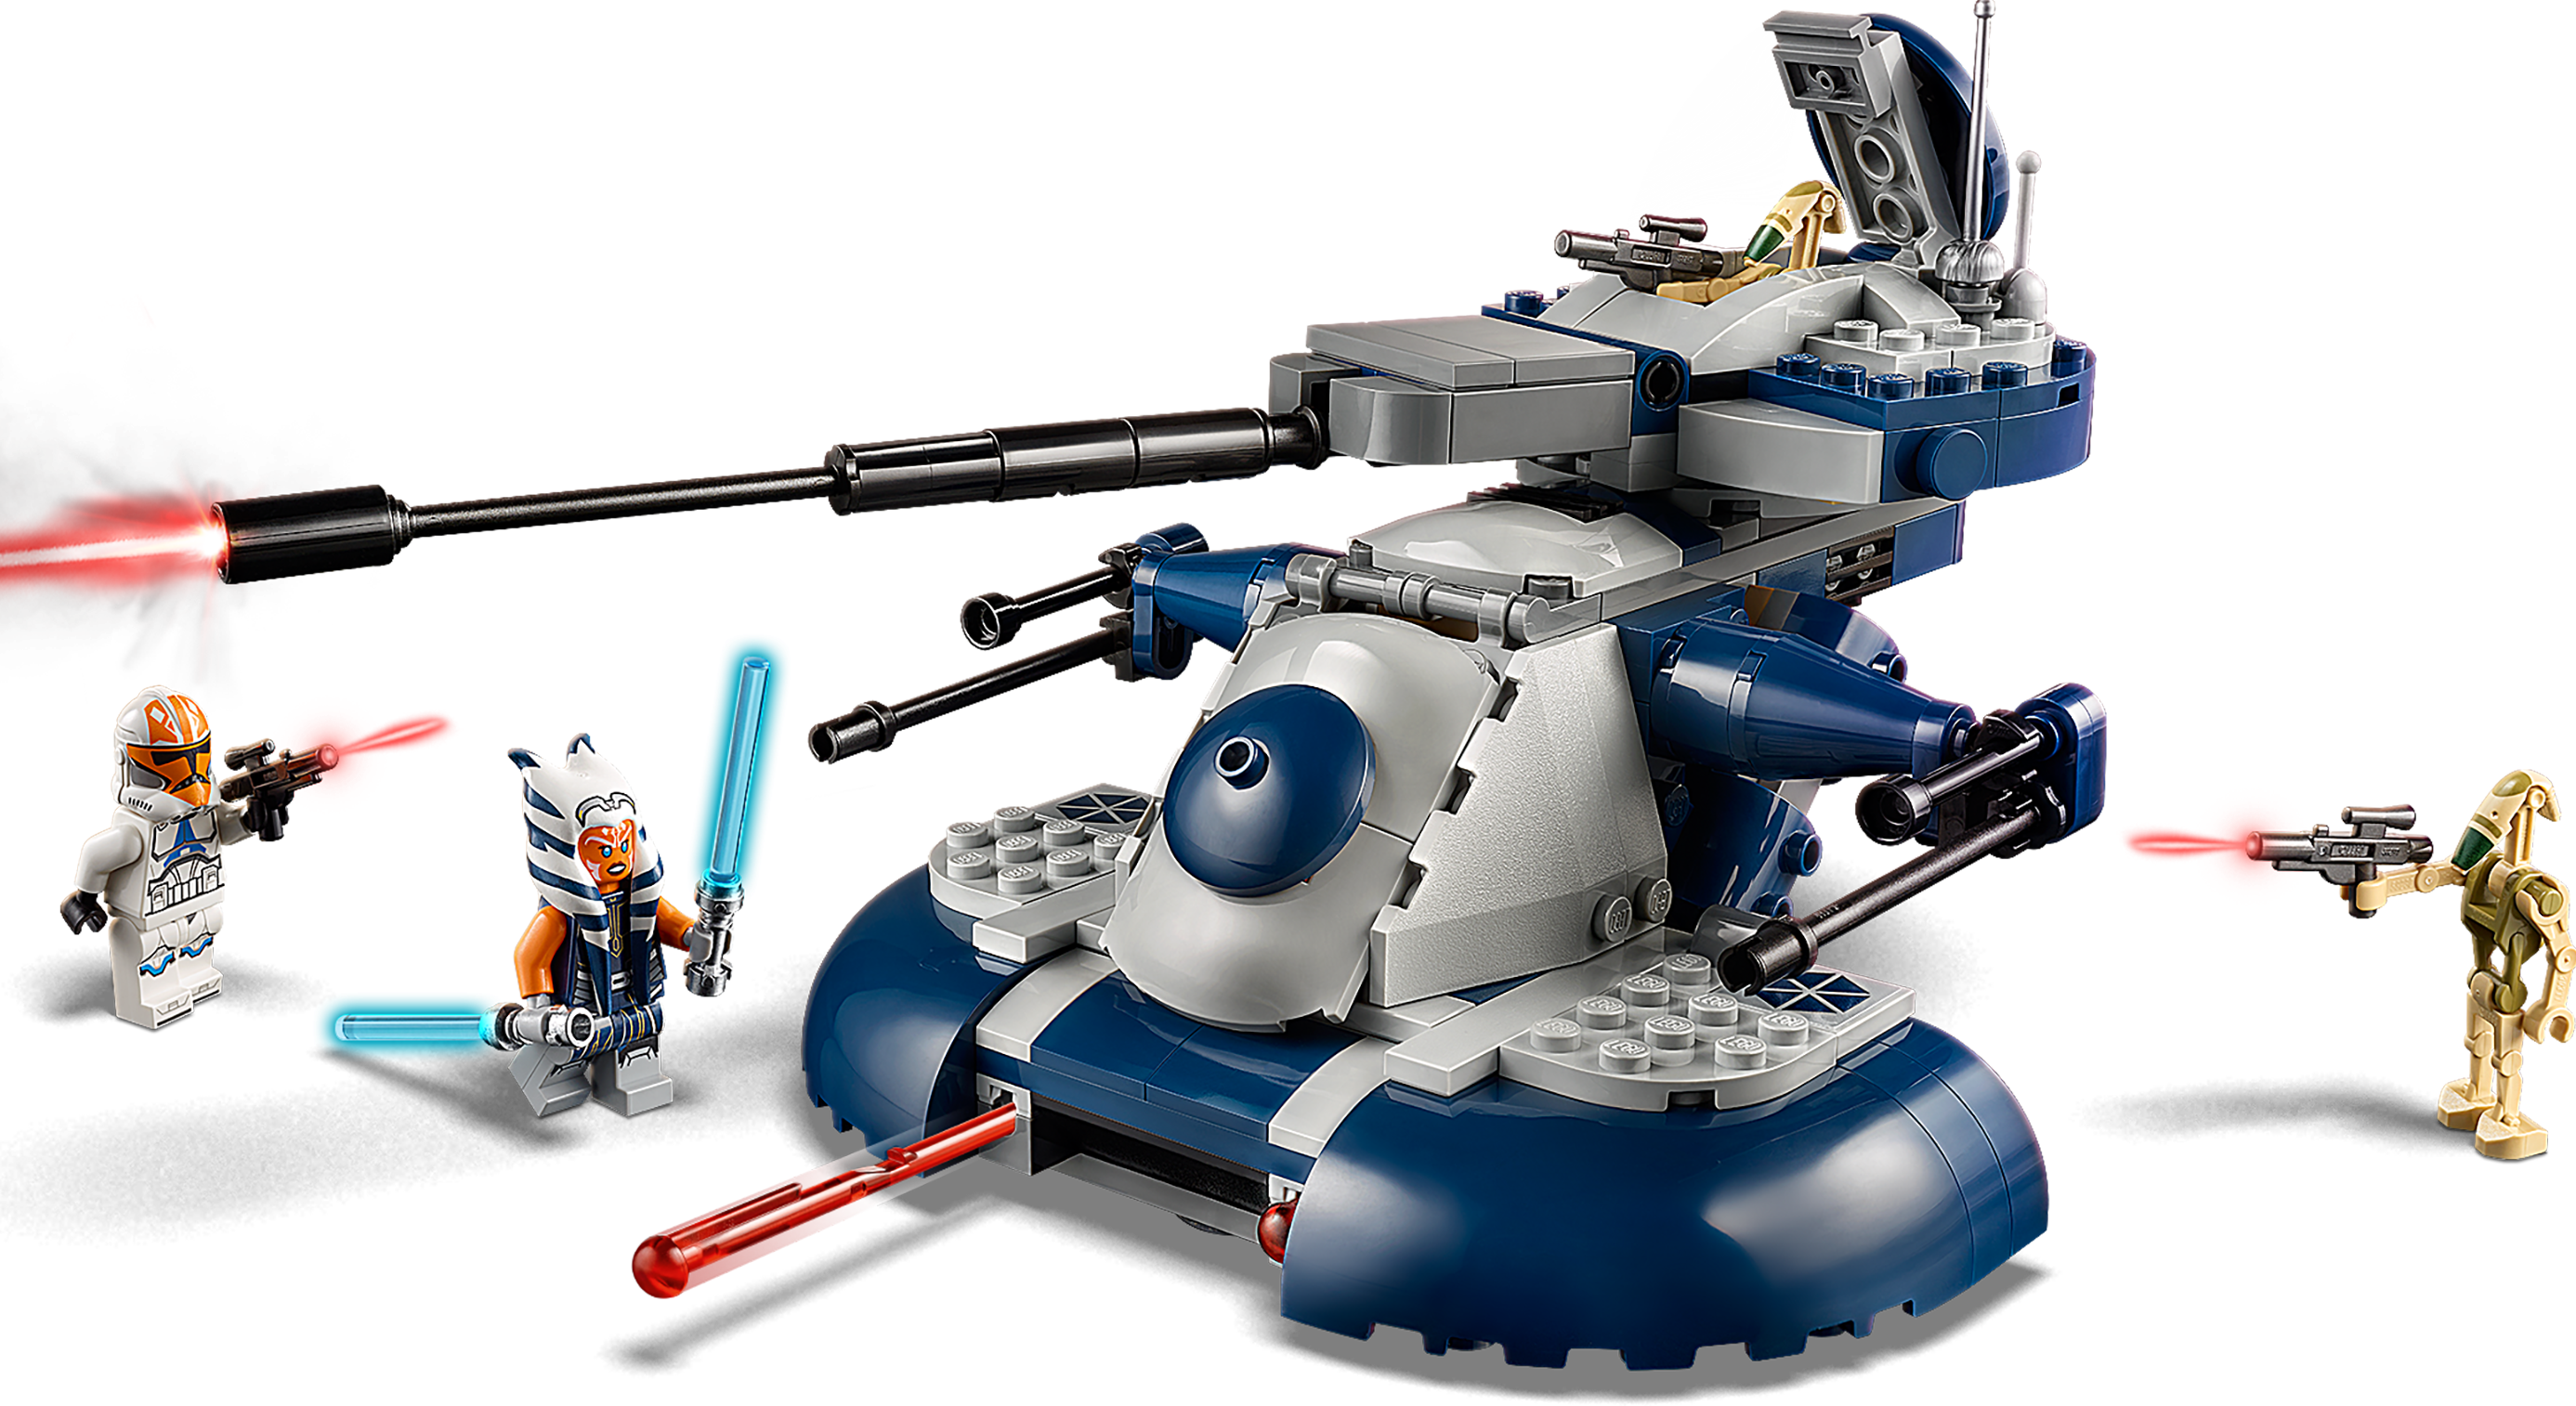 Lego Star Wars 75280 501st Legion™ Clone Troopers and 75283 Armored Assault Tank